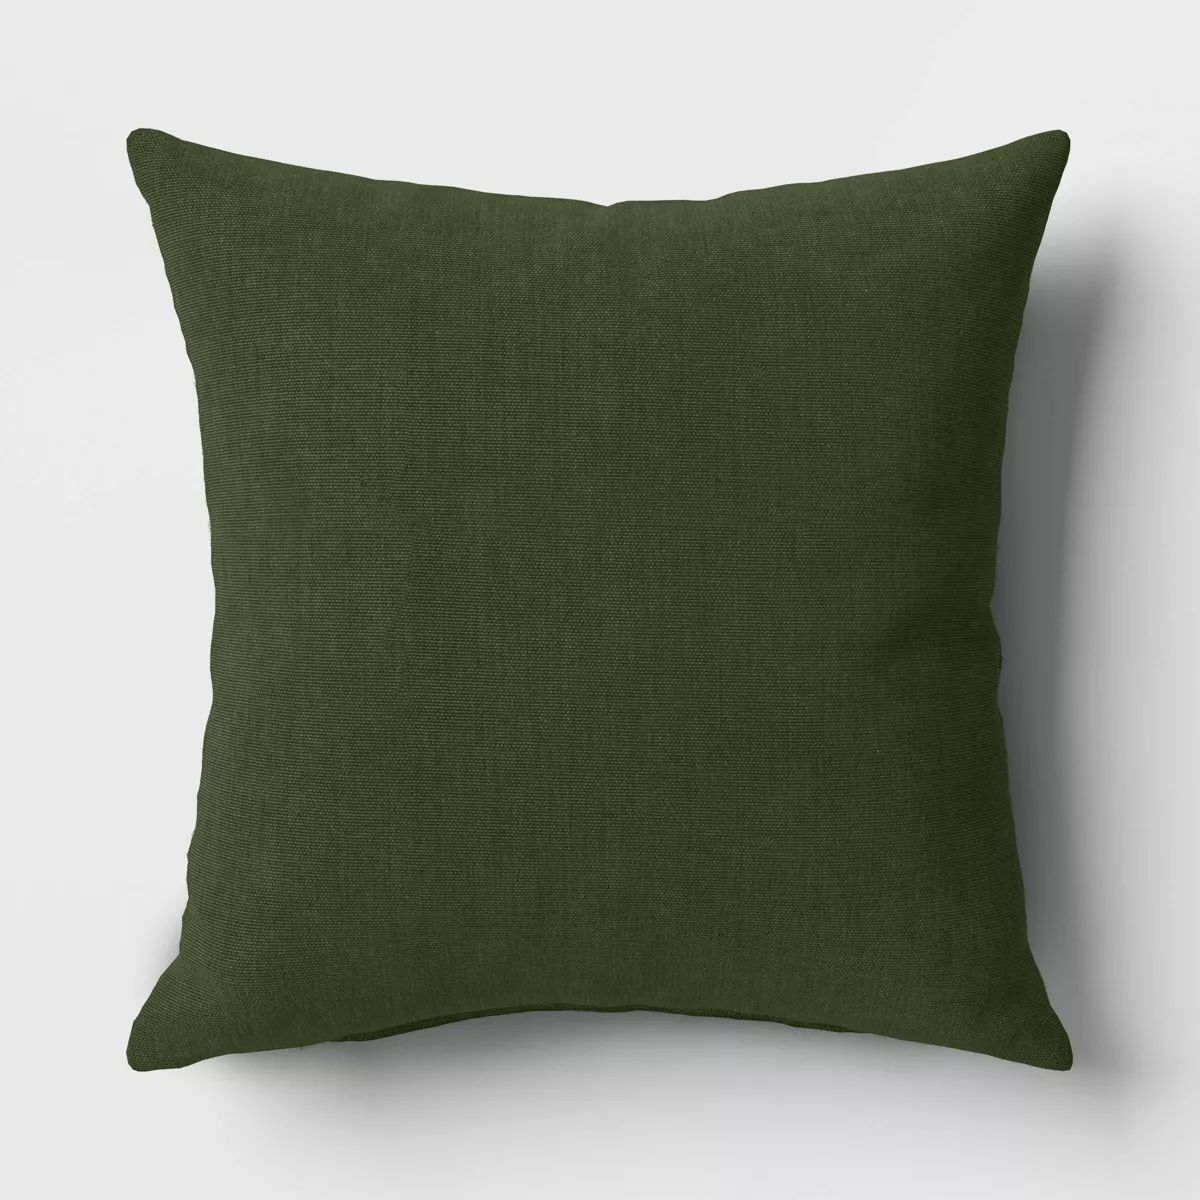 18"x18" Solid Woven Square Outdoor Throw Pillow - Threshold™ | Target